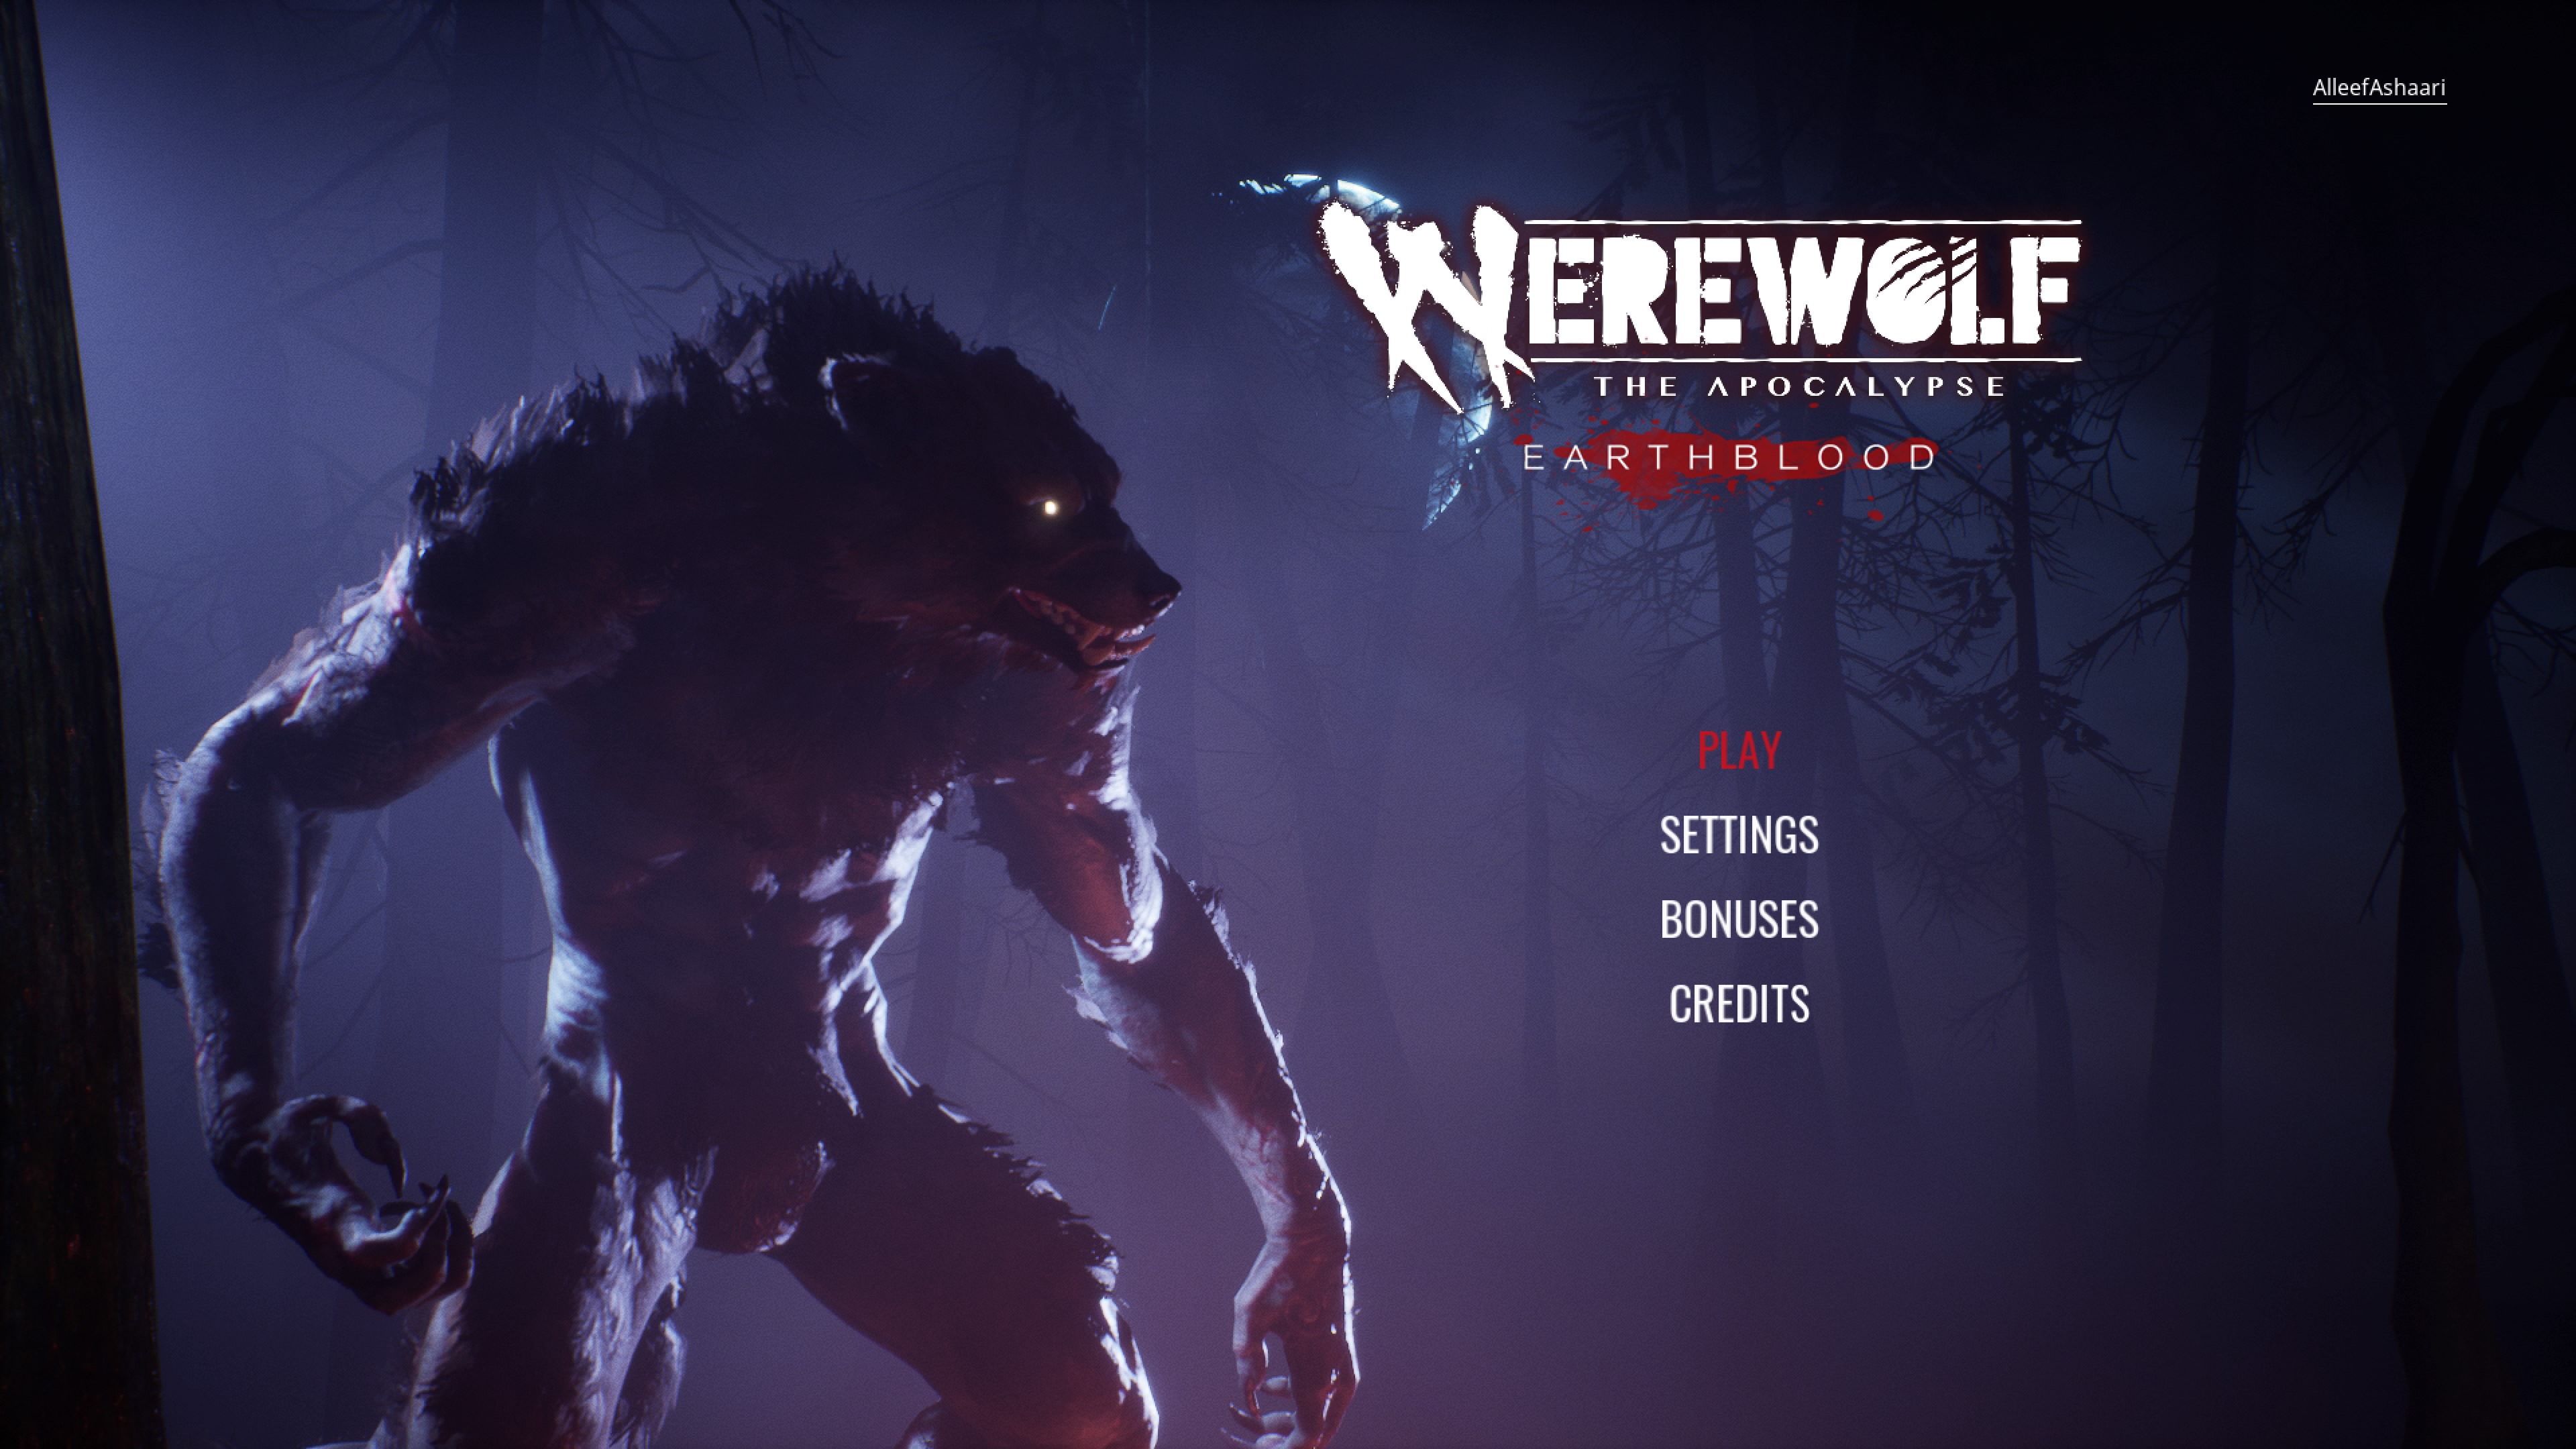 Werewolf The Apocalypse Earthblood Guide: How To Be The Warrior Of Gaia